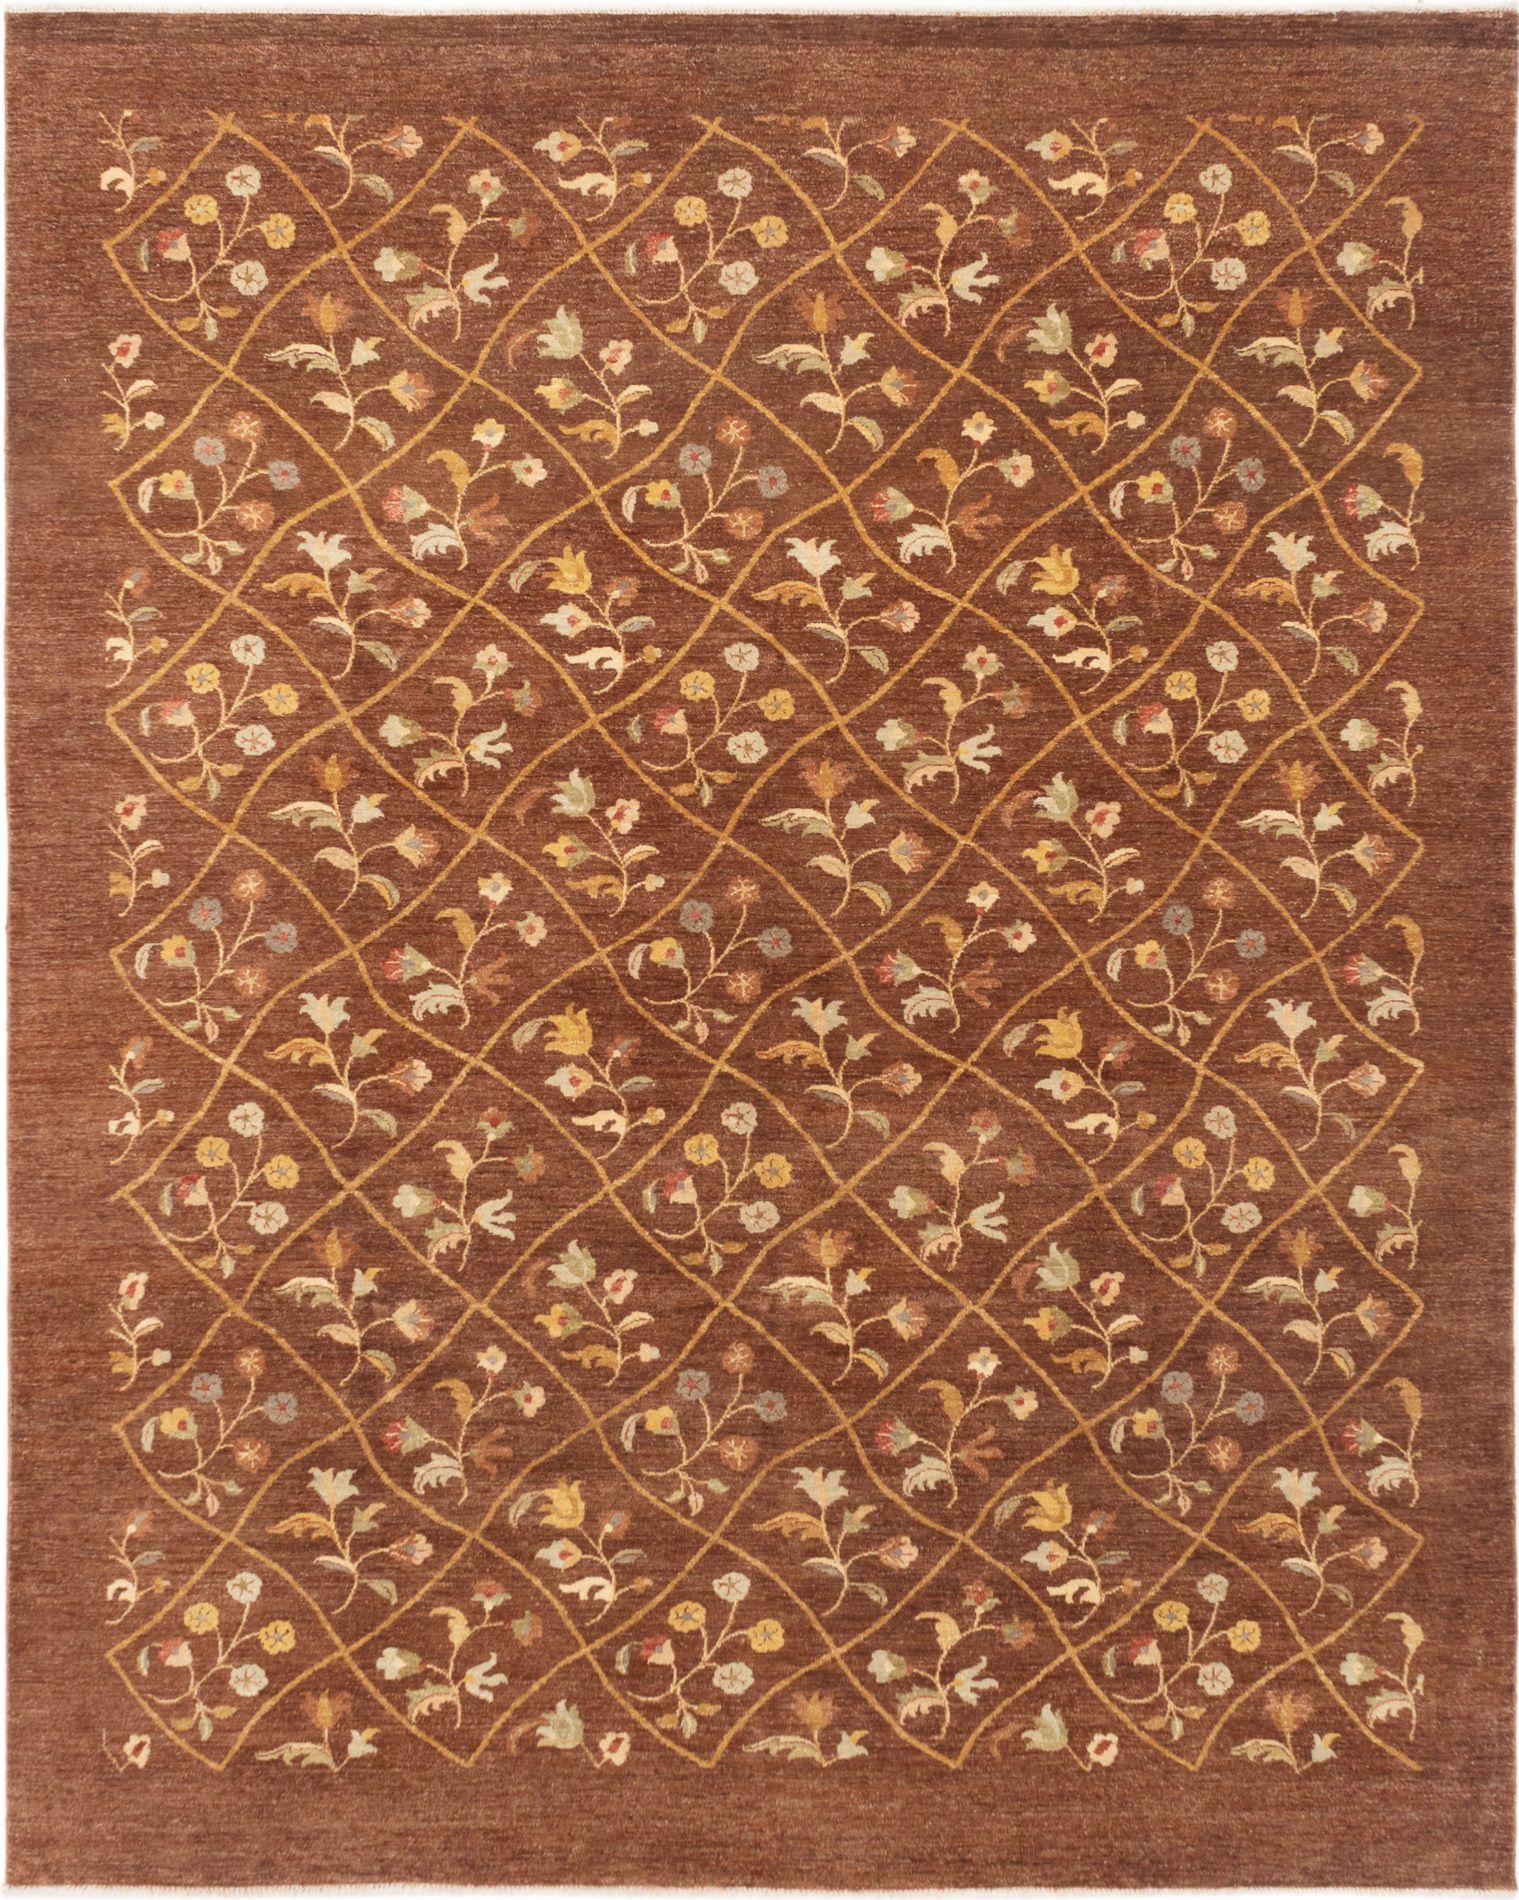 Hand-knotted Chobi Twisted Dark Brown Wool Rug 8'0" x 10'0"  Size: 8'0" x 10'0"  